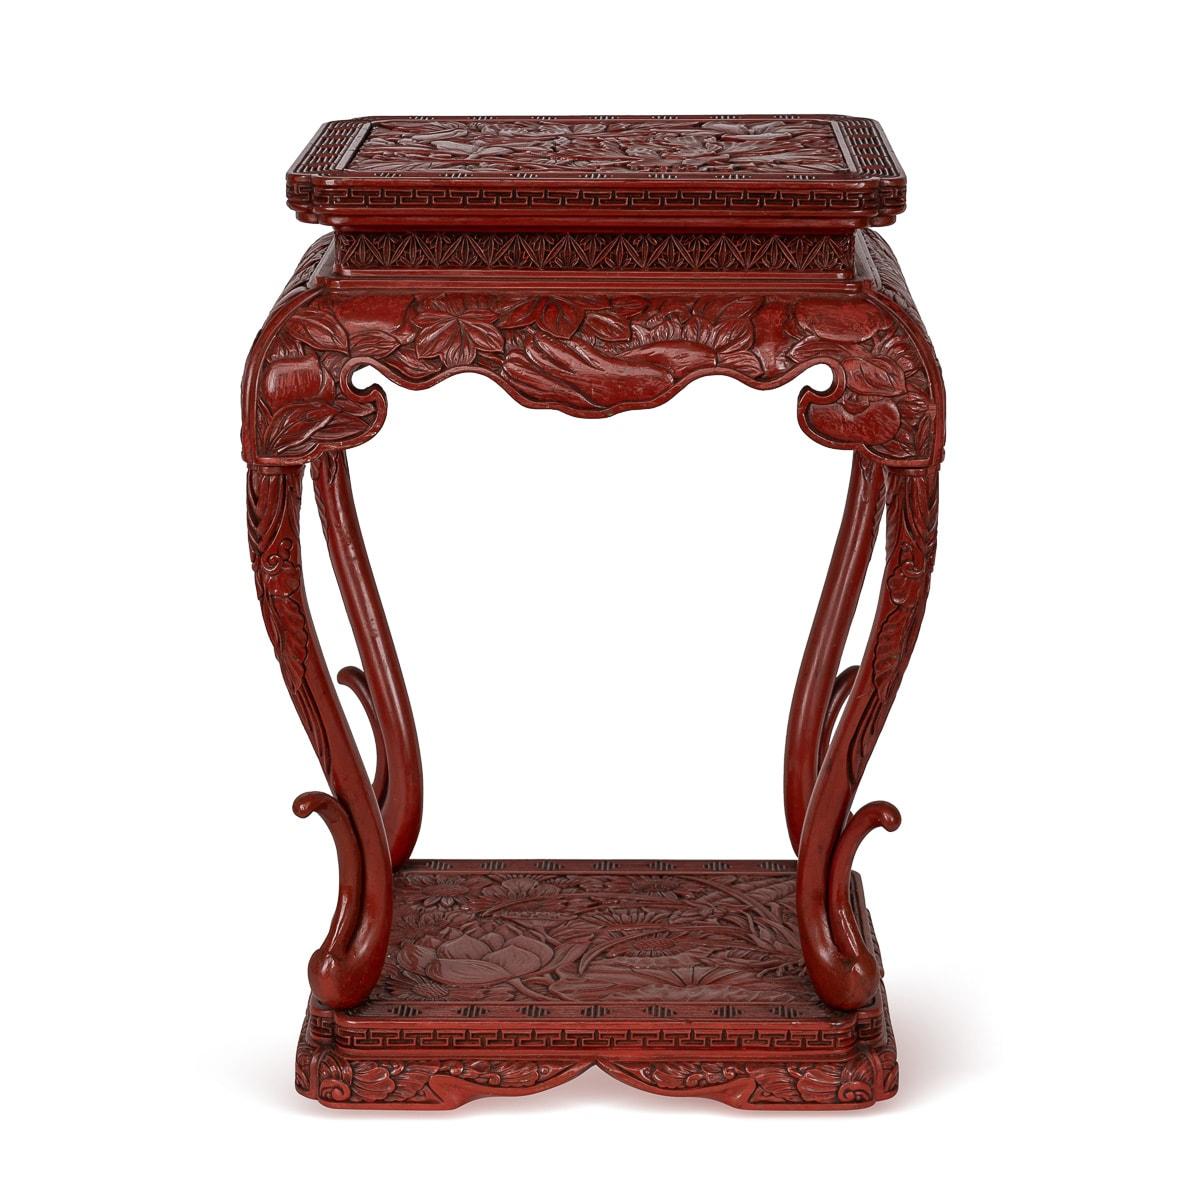 An exquisite 19th Century Chinese red lacquer pedestal table. Crafted in a square shape with gracefully curved legs that merge seamlessly with the base, it captivates all who encounter it. Adorned with deeply carved lotus flowers and flowing floral